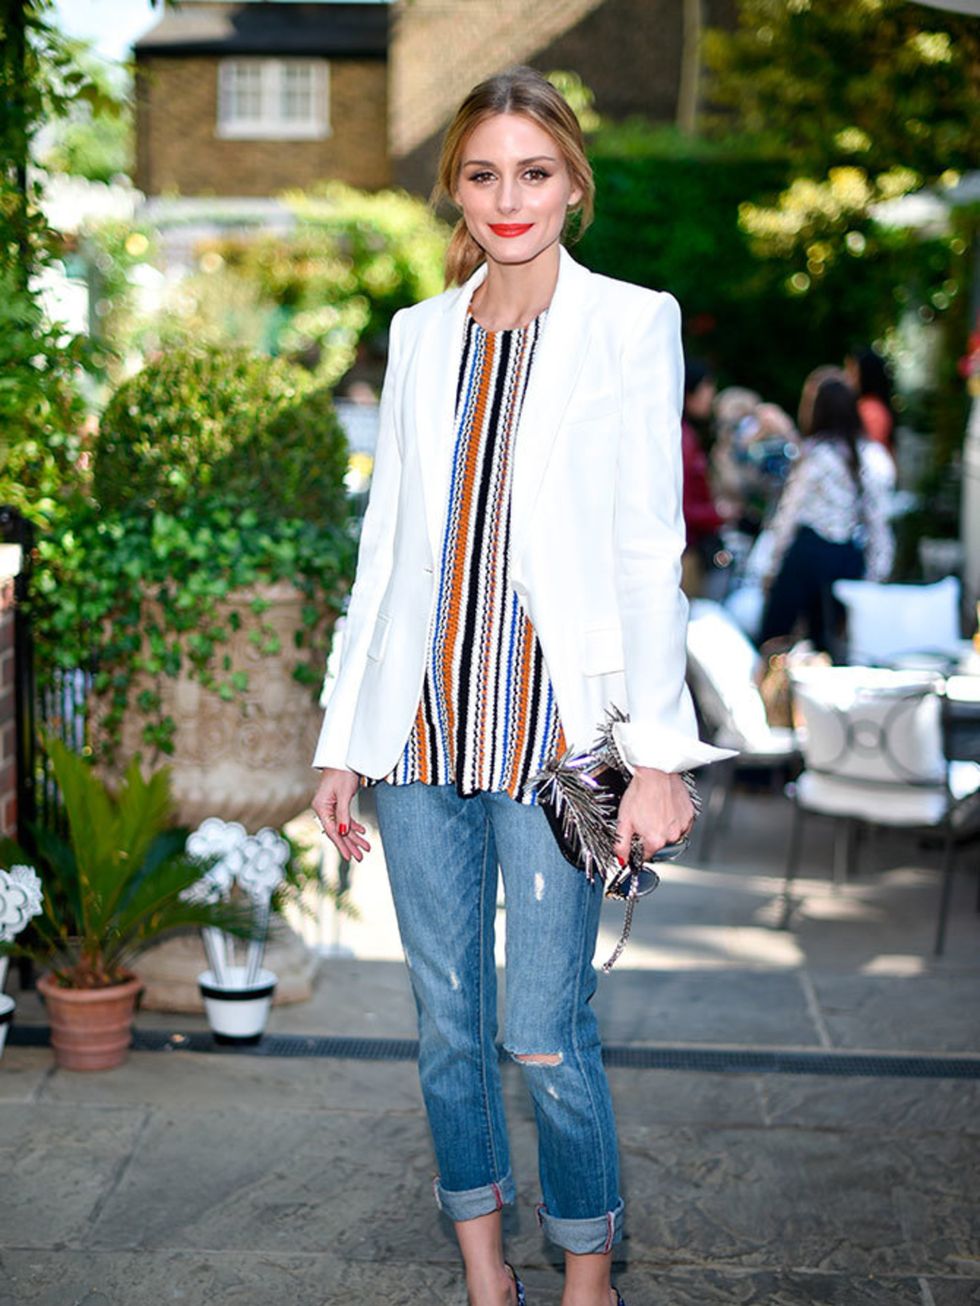 Olivia Palermo in London, May 2015.